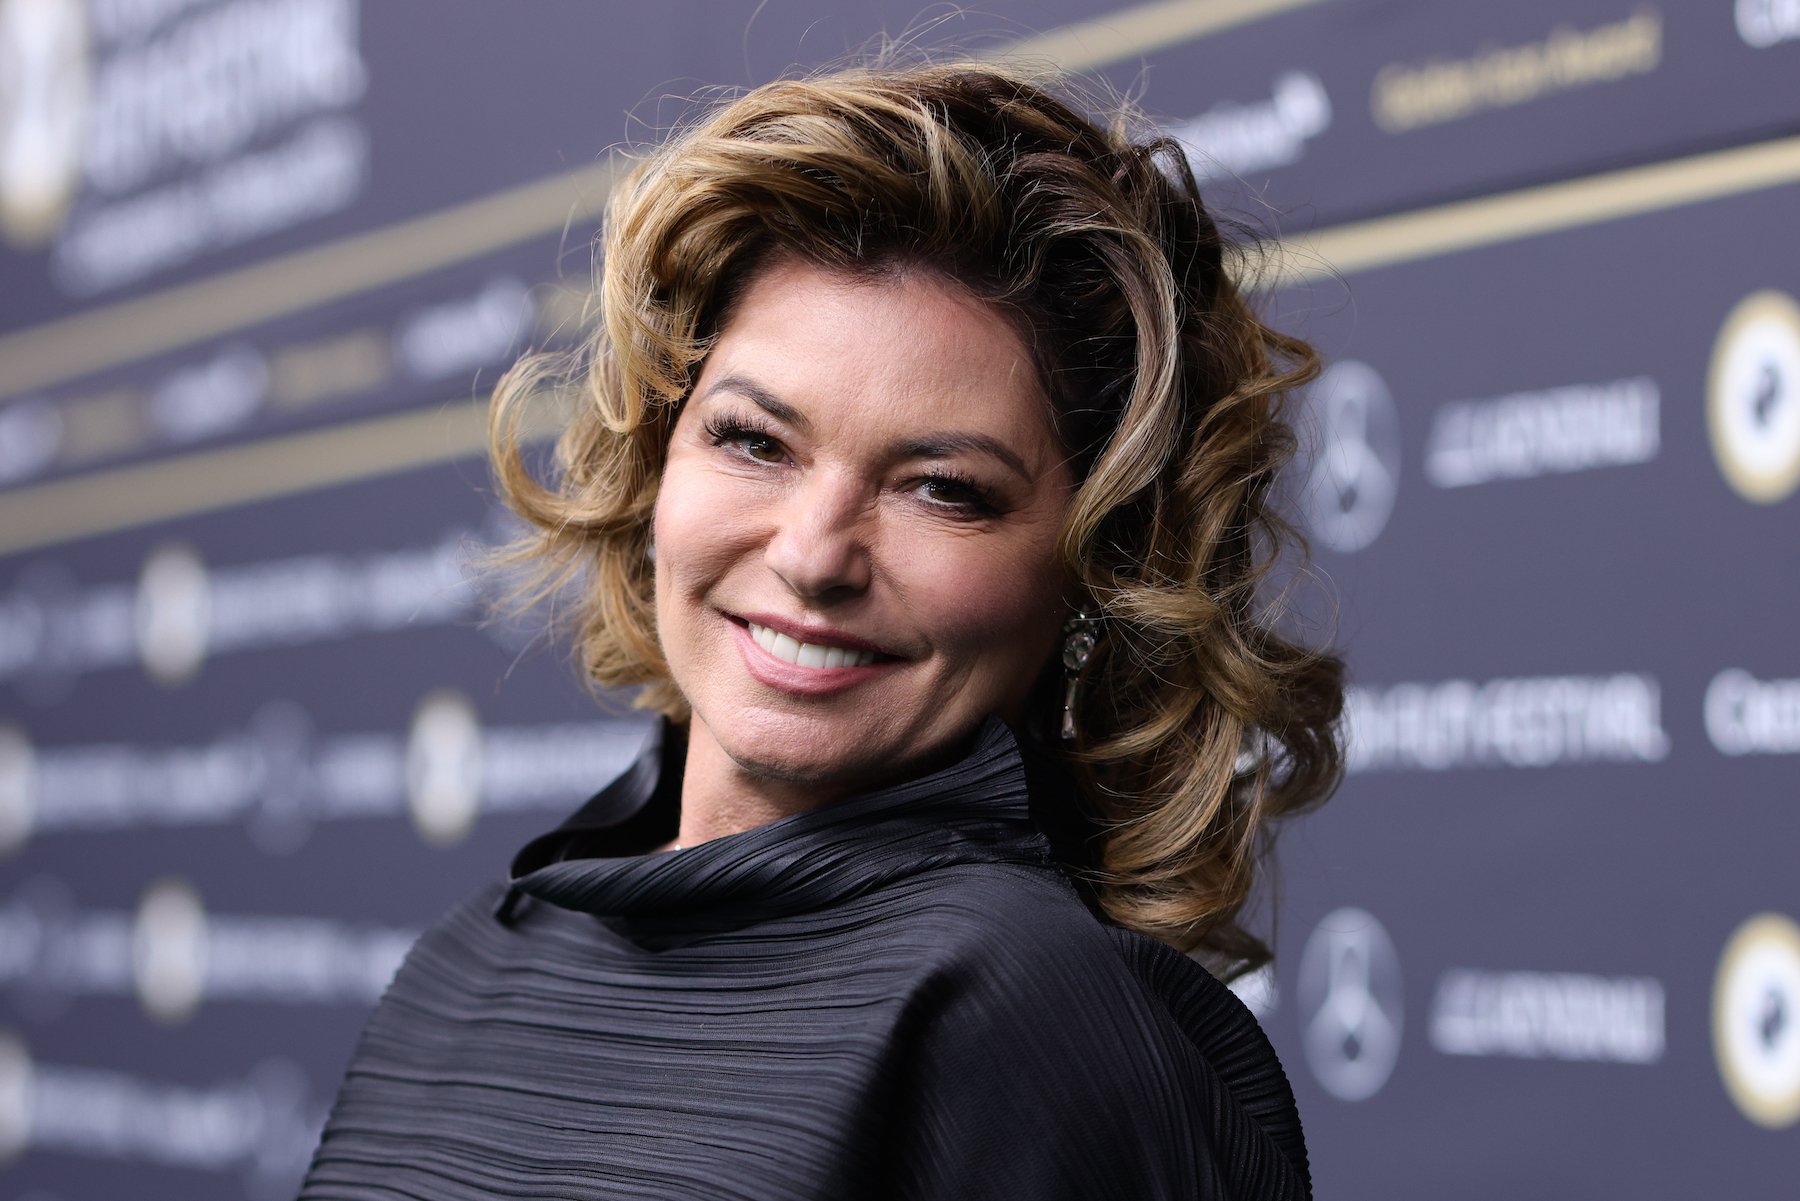 Shania Twain Thought Getting Lyme Disease Would Be the End of Her Singing Career